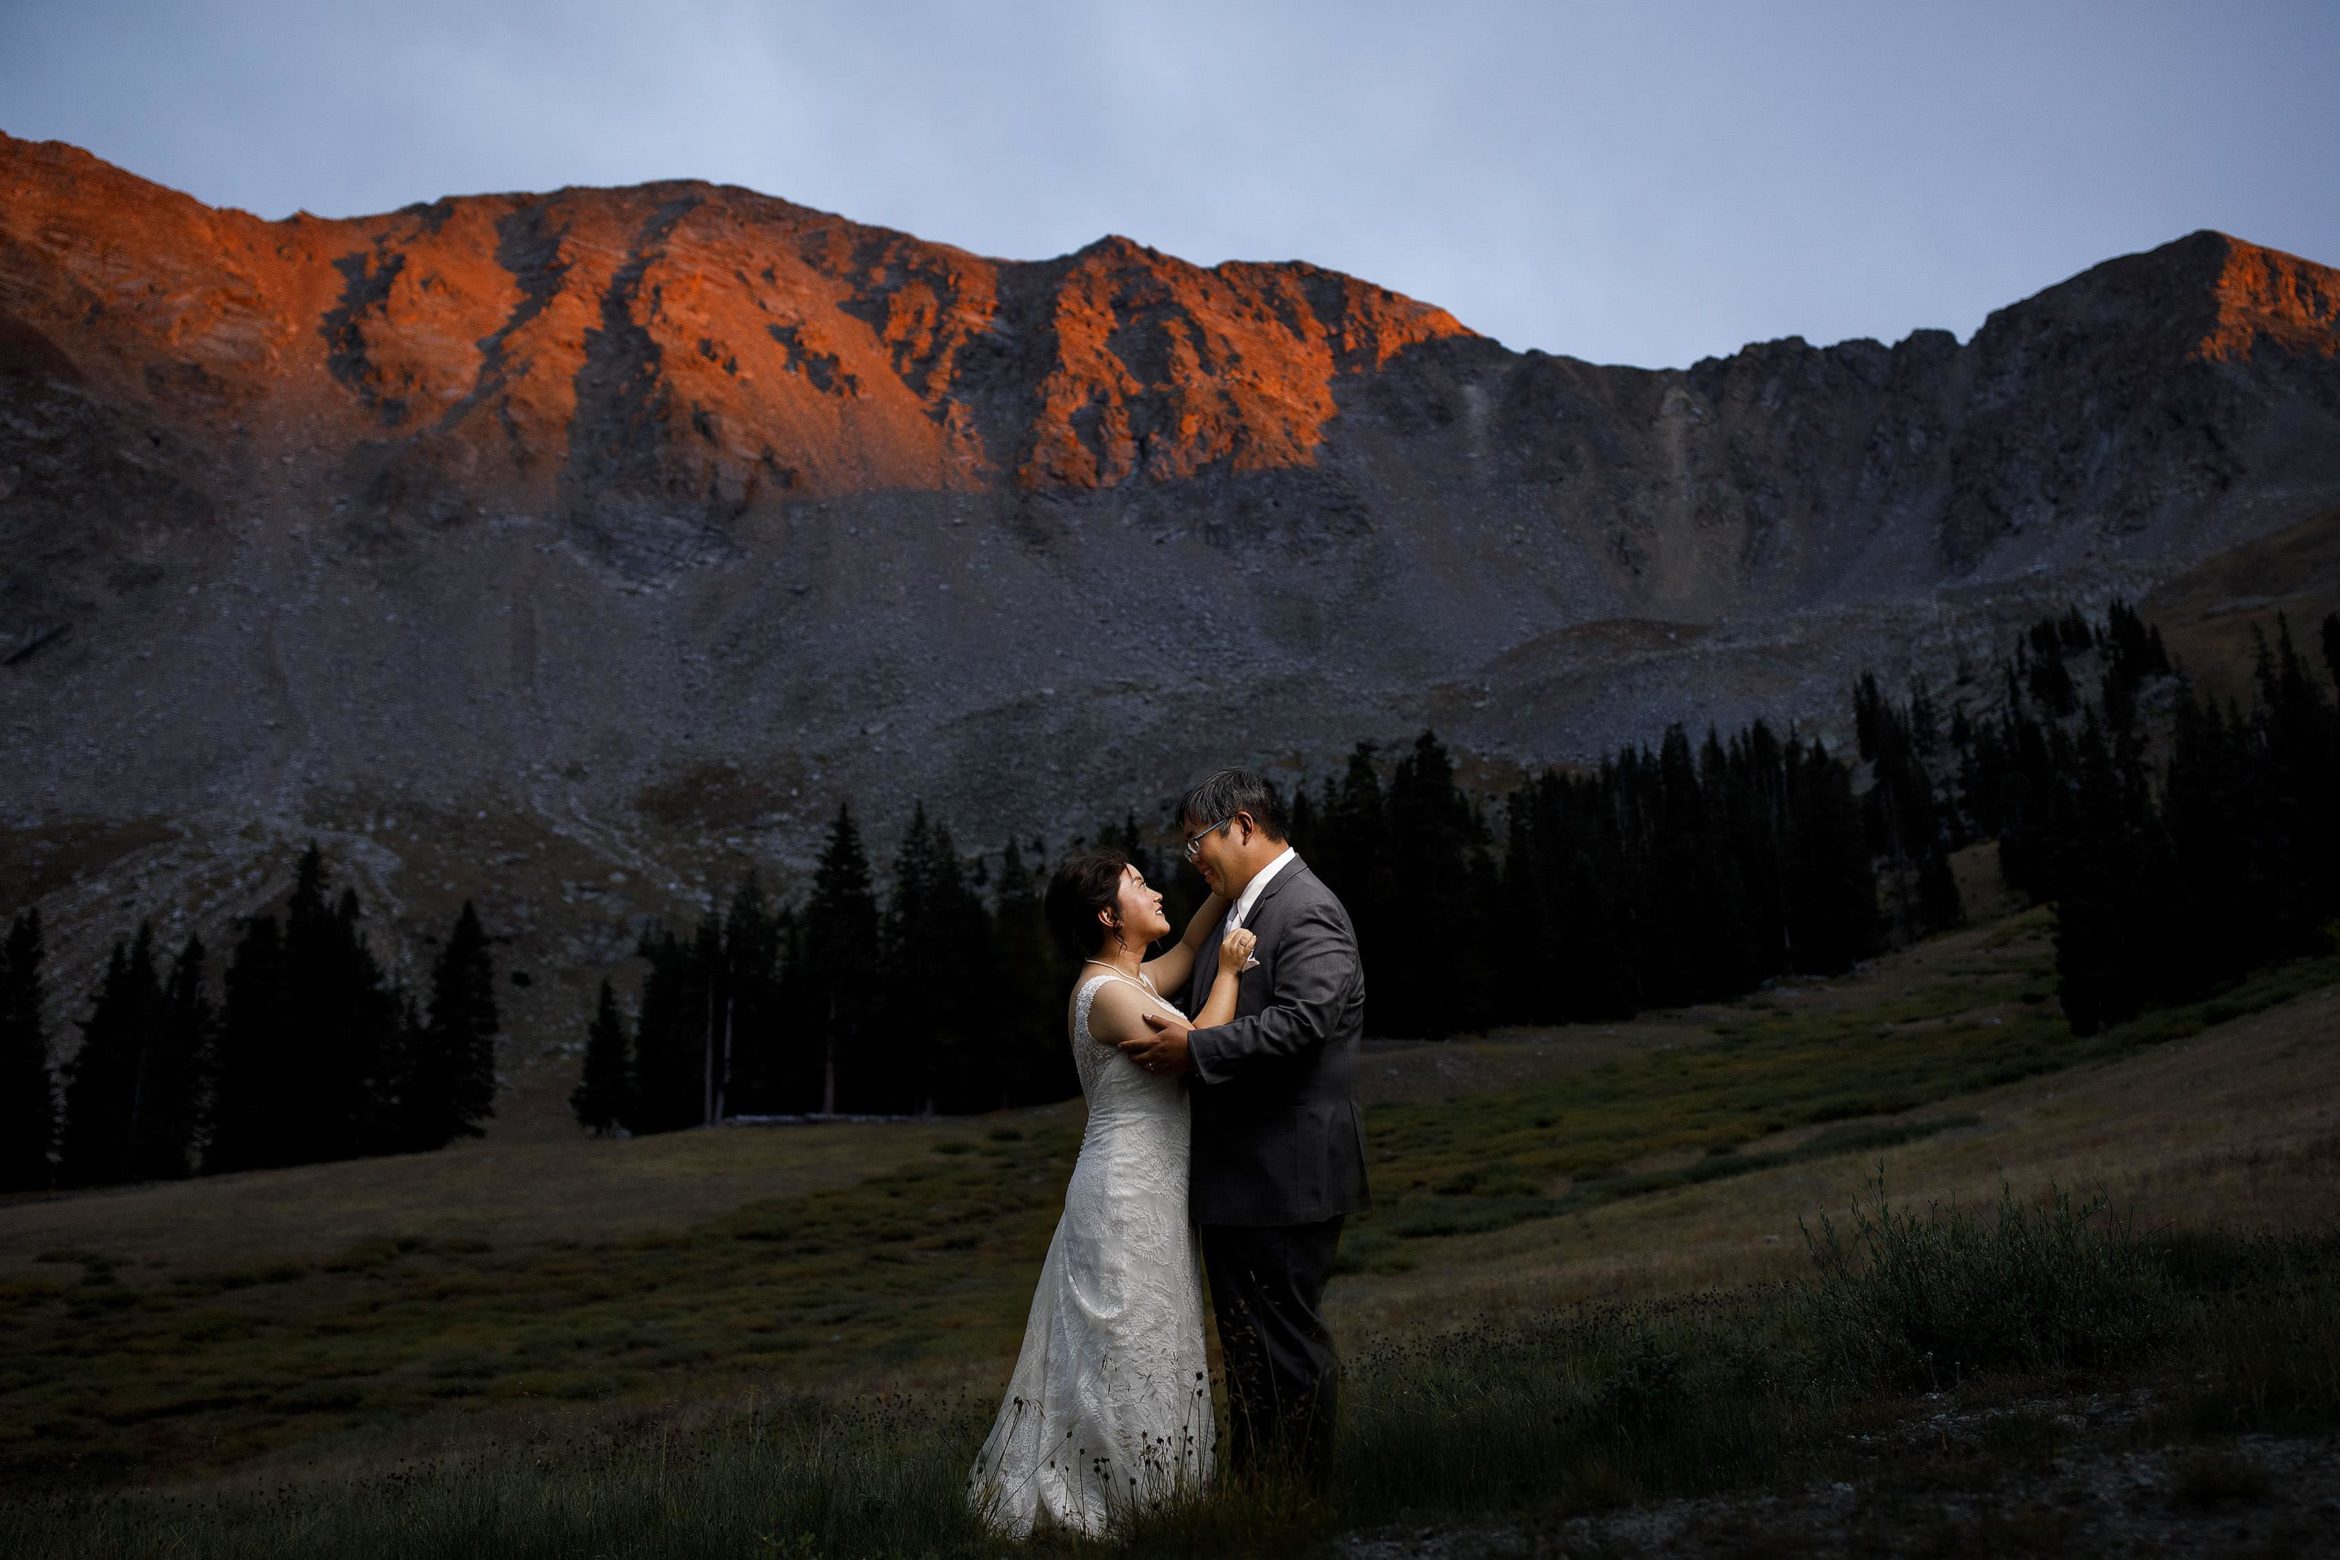 A couple share a moment together as alpenglow hits the East Wall at Arapahoe Basin on their wedding day